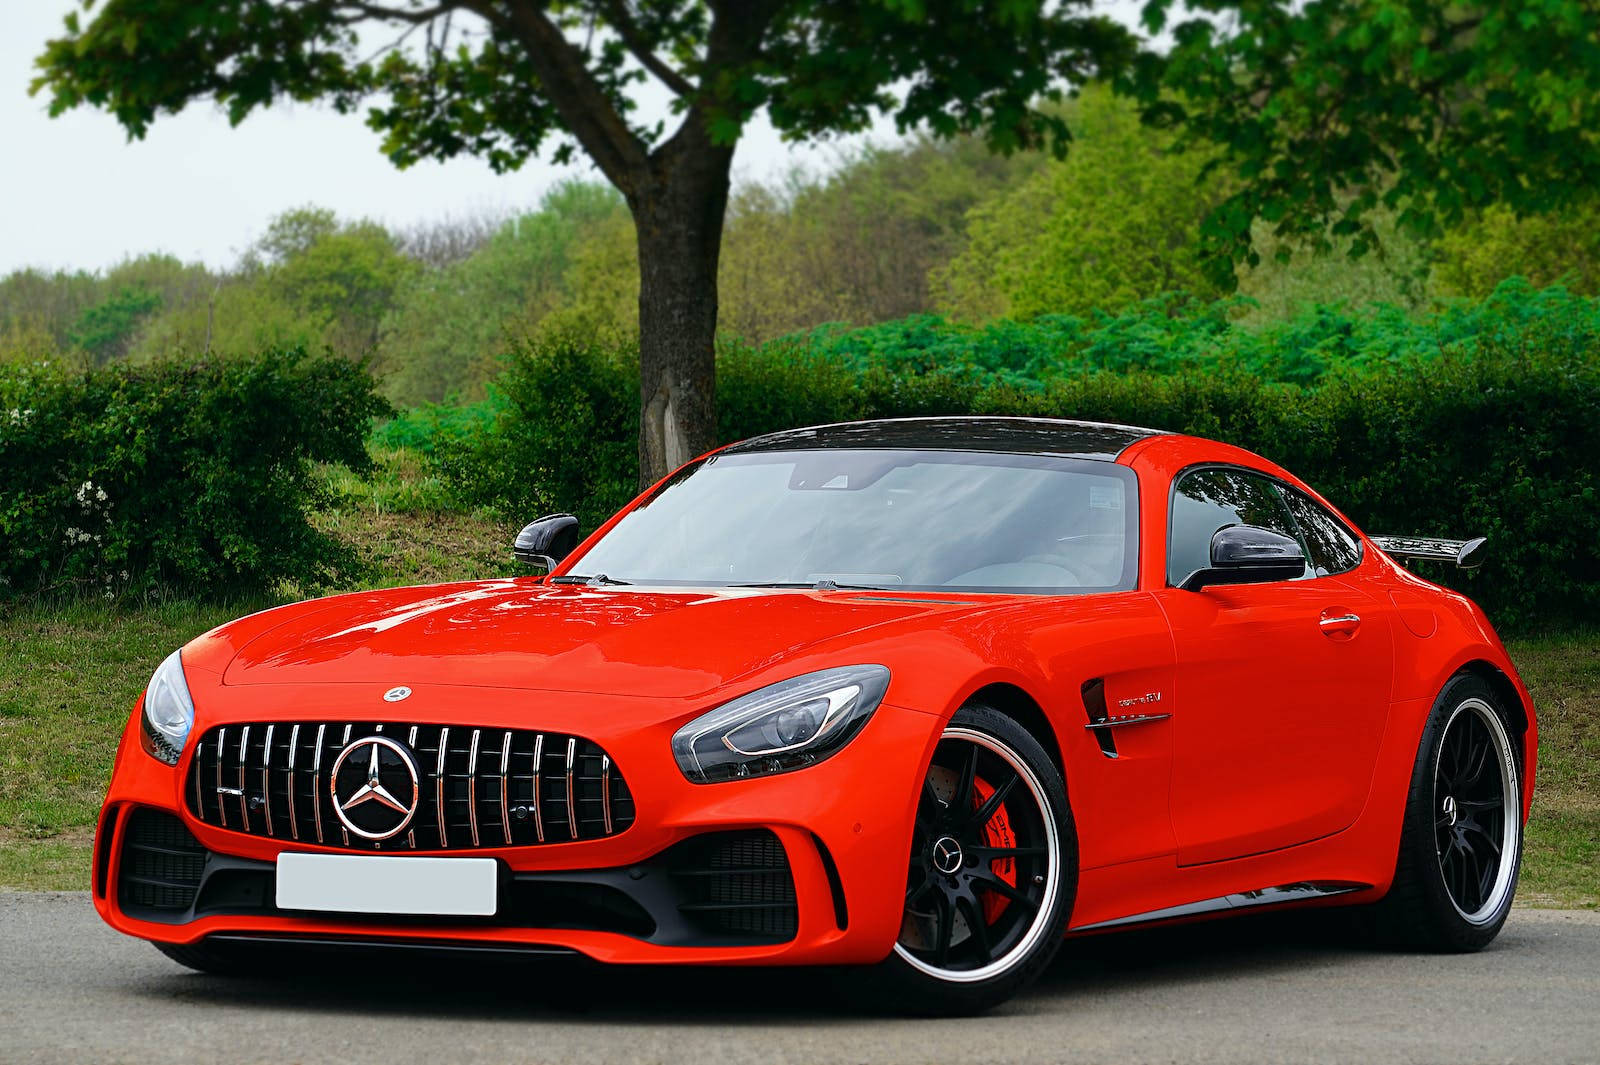 Showcasing Speed And Elegance: Red Mercedes-amg Gt Luxury Car Background